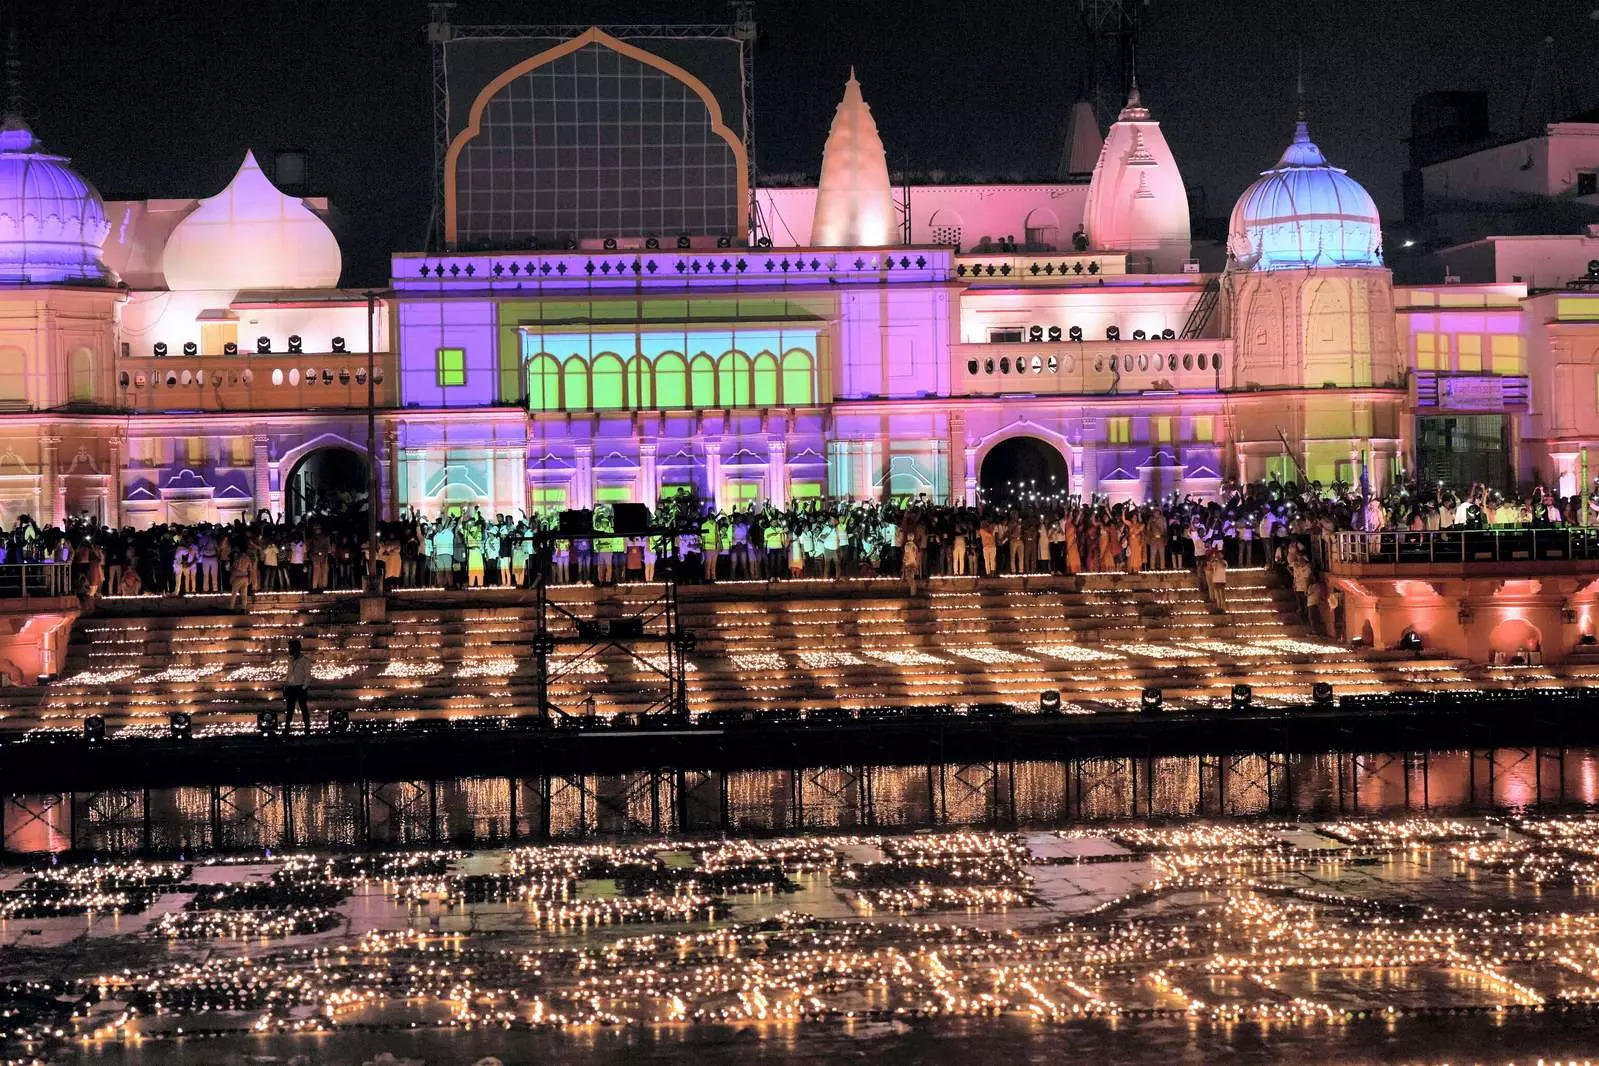 These images from Ayodhya’s Deepotsav will leave you mesmerised!